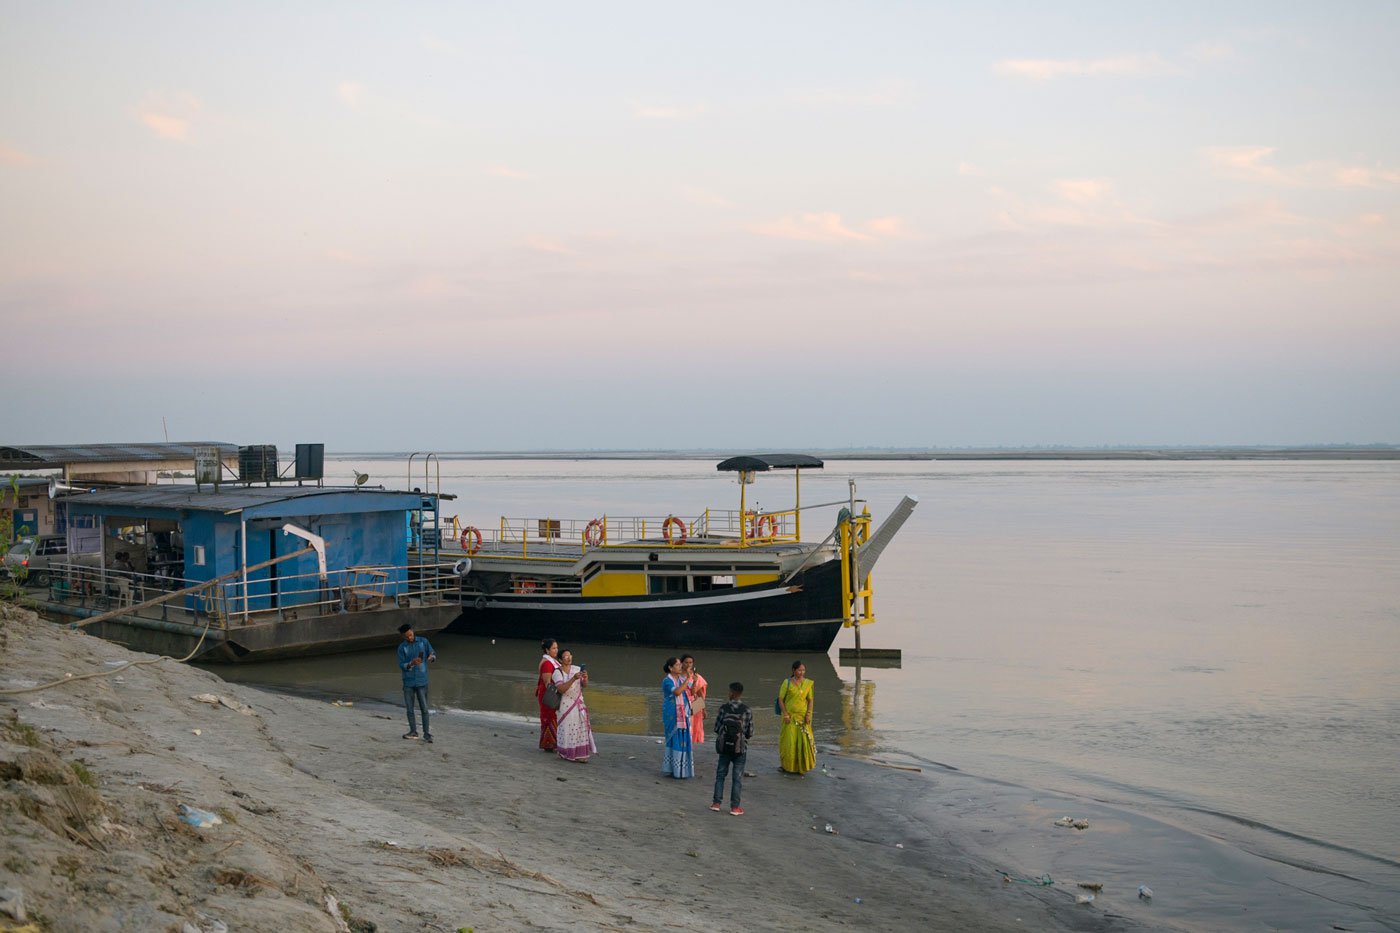 The Raas festival draws pilgrims and tourists to Majuli every year. The Kamalabari Ghat situated on the Brahmaputra river, is a major ferry station and is even busier during the festival